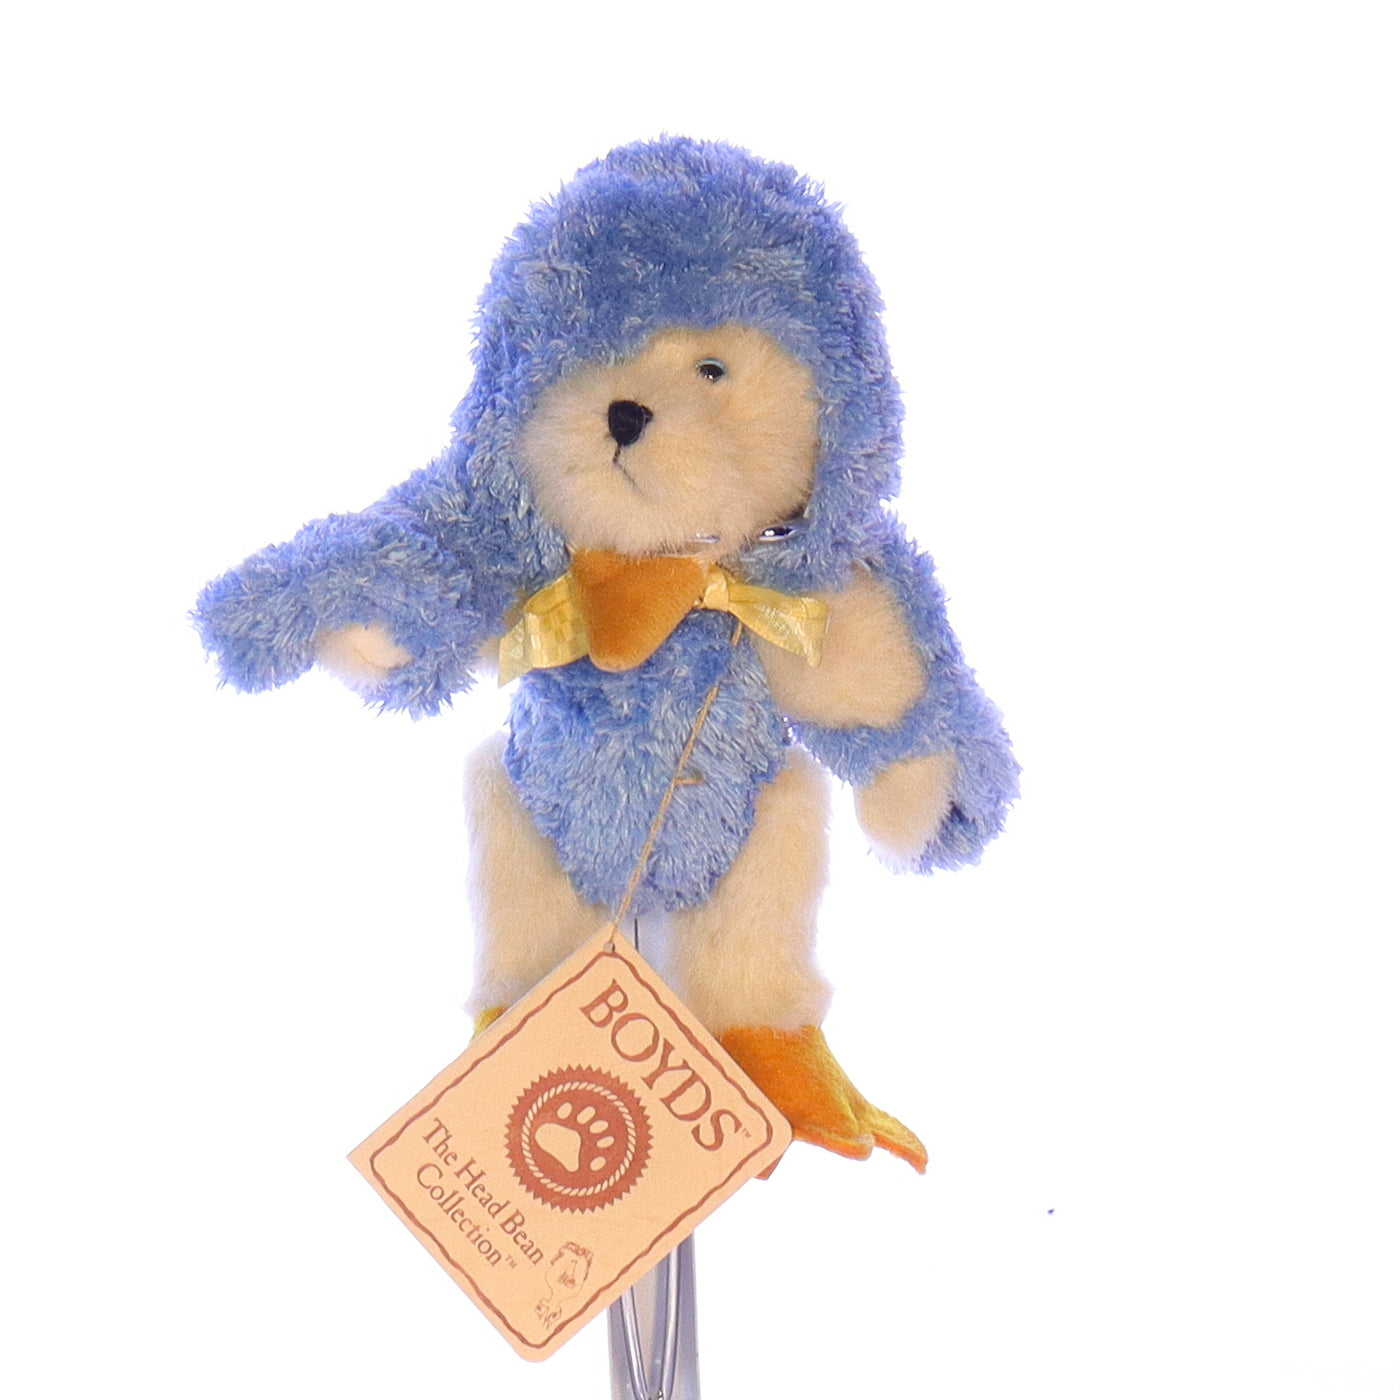 Boyds_Bears_and_Friends_904264_B_Jay_Tweeter_Boyds_Best_Dressed_Series_Stuffed_Animal_1988 Front View